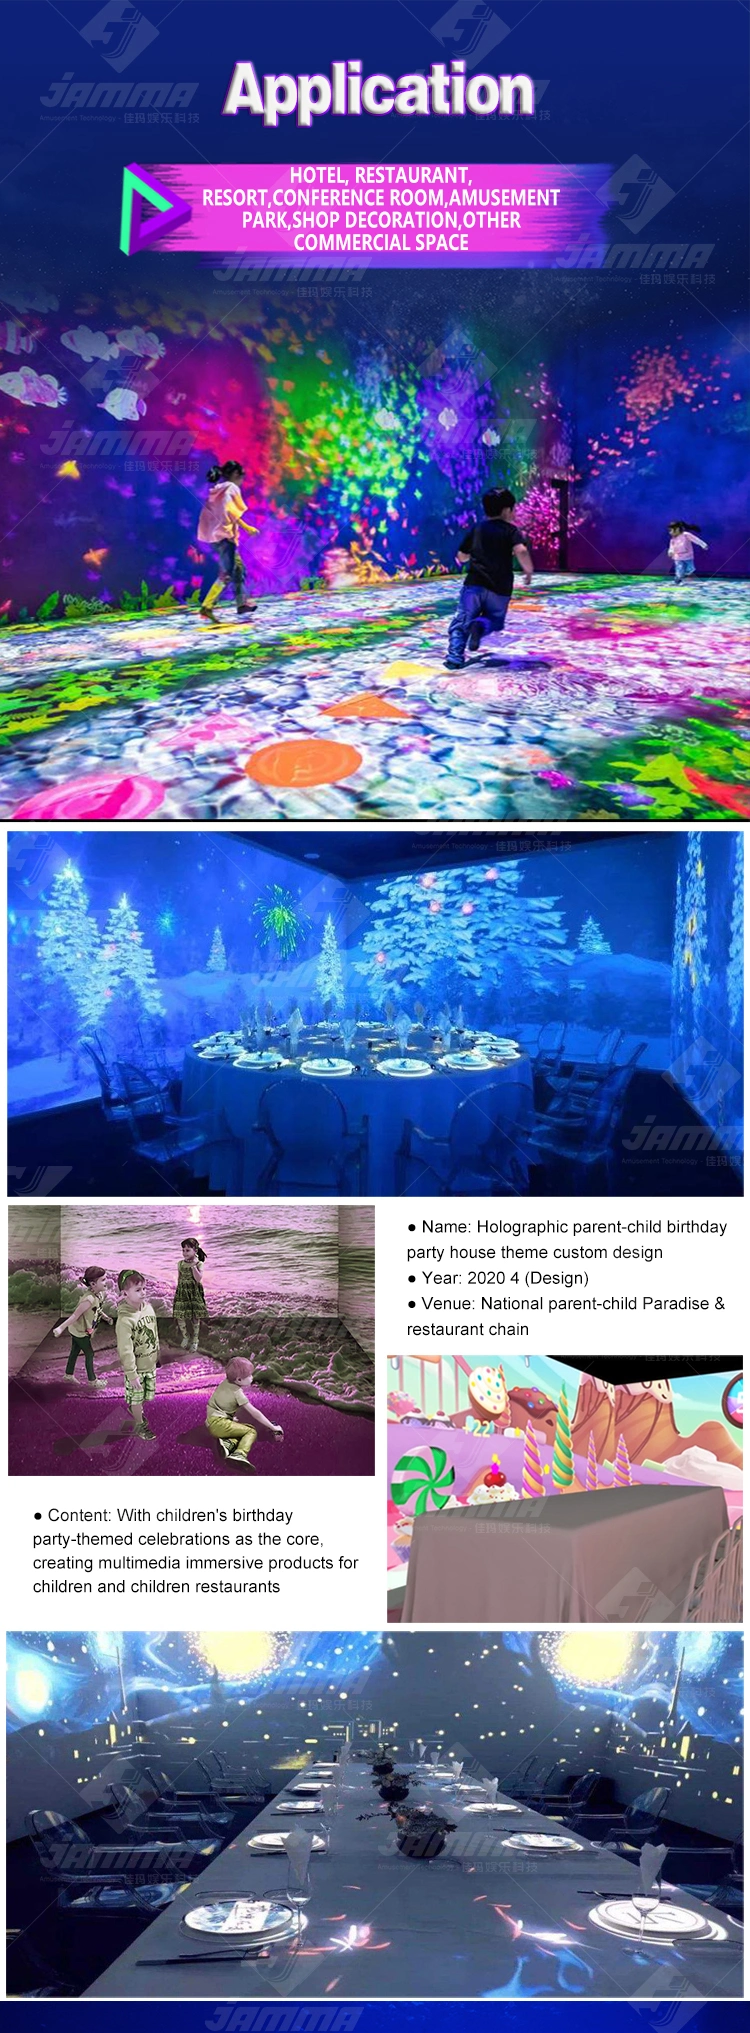 Full 360 Degree Immersive Spaces Ar Interactive Projection 3D Holograph Interact Floor Wall Projector